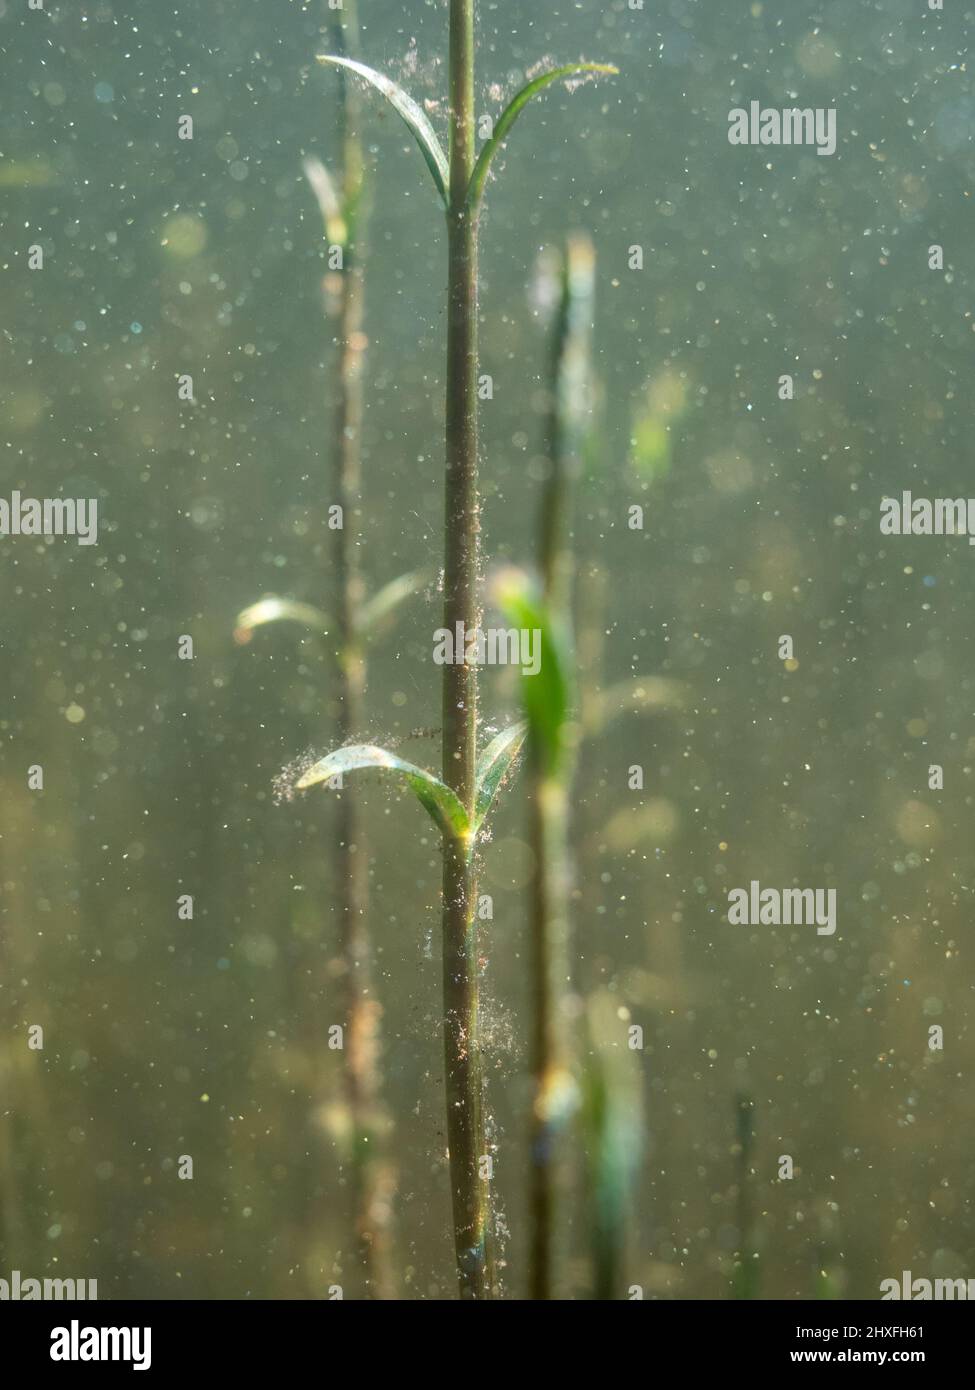 Underwater stems and leaves of tufted loosestrife aquatic plant Stock Photo